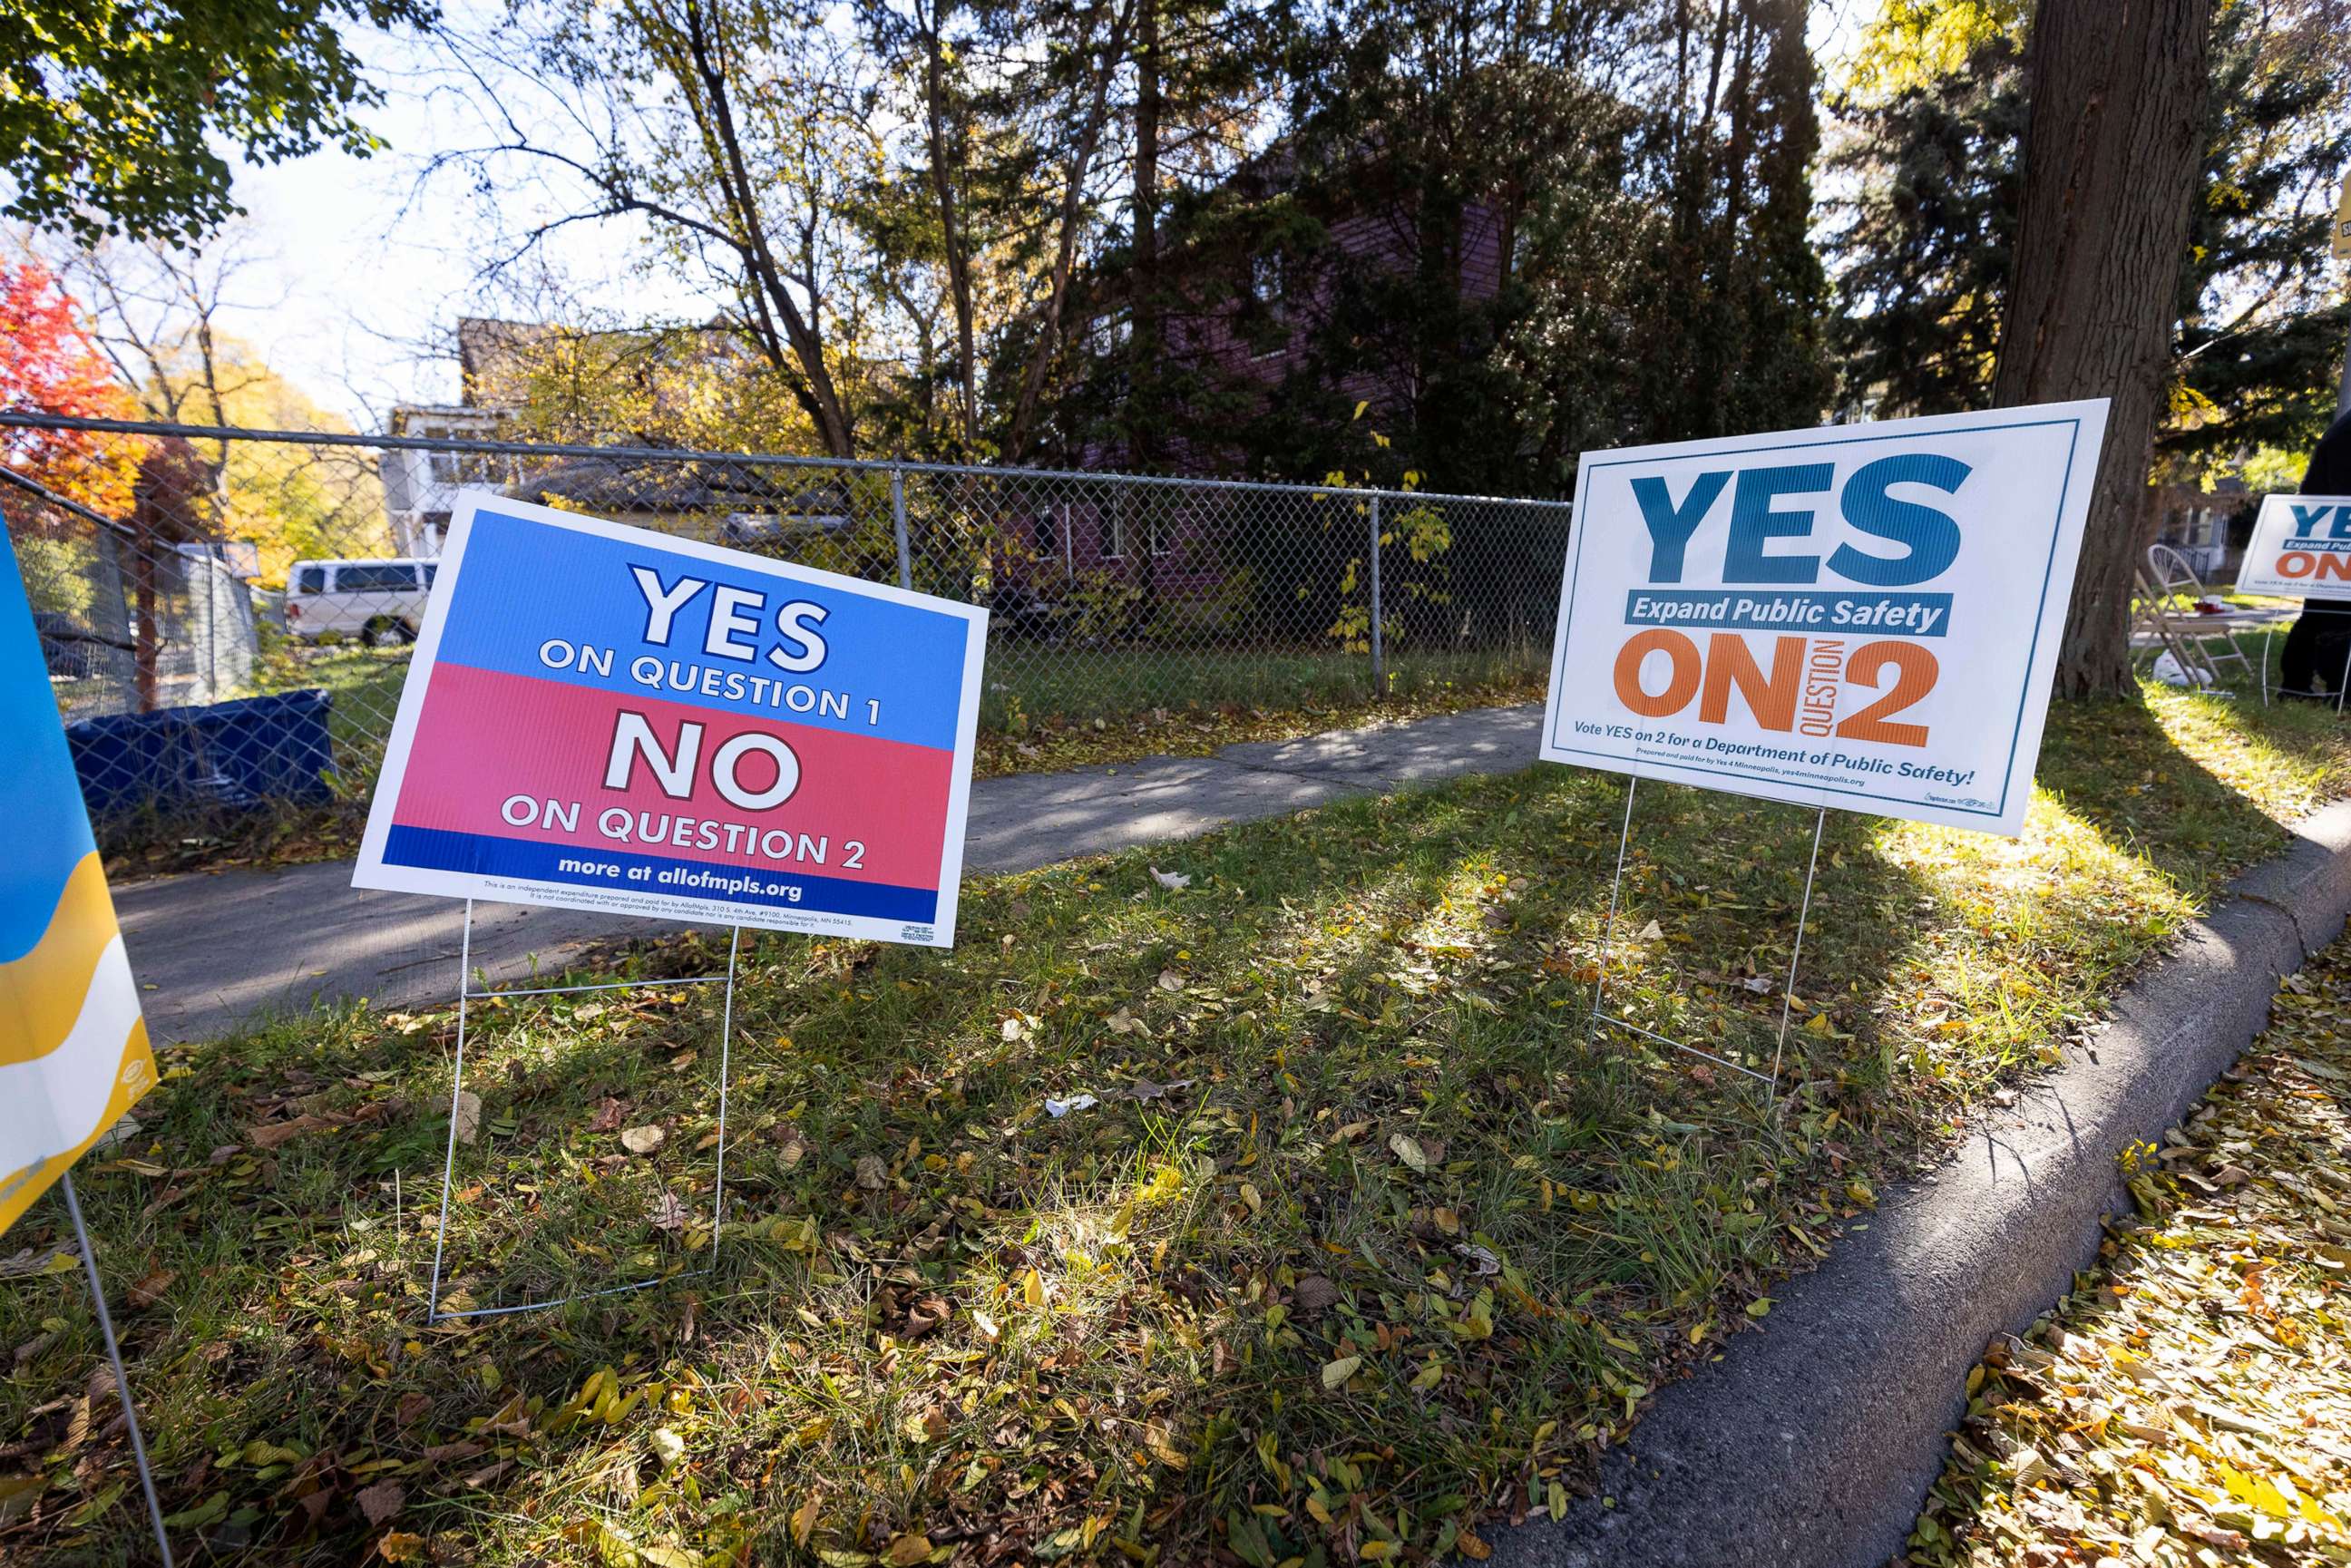 PHOTO: Lawn signs in favor of opposite positions are placed outside of a polling place on Nov. 2, 2021, in Minneapolis.